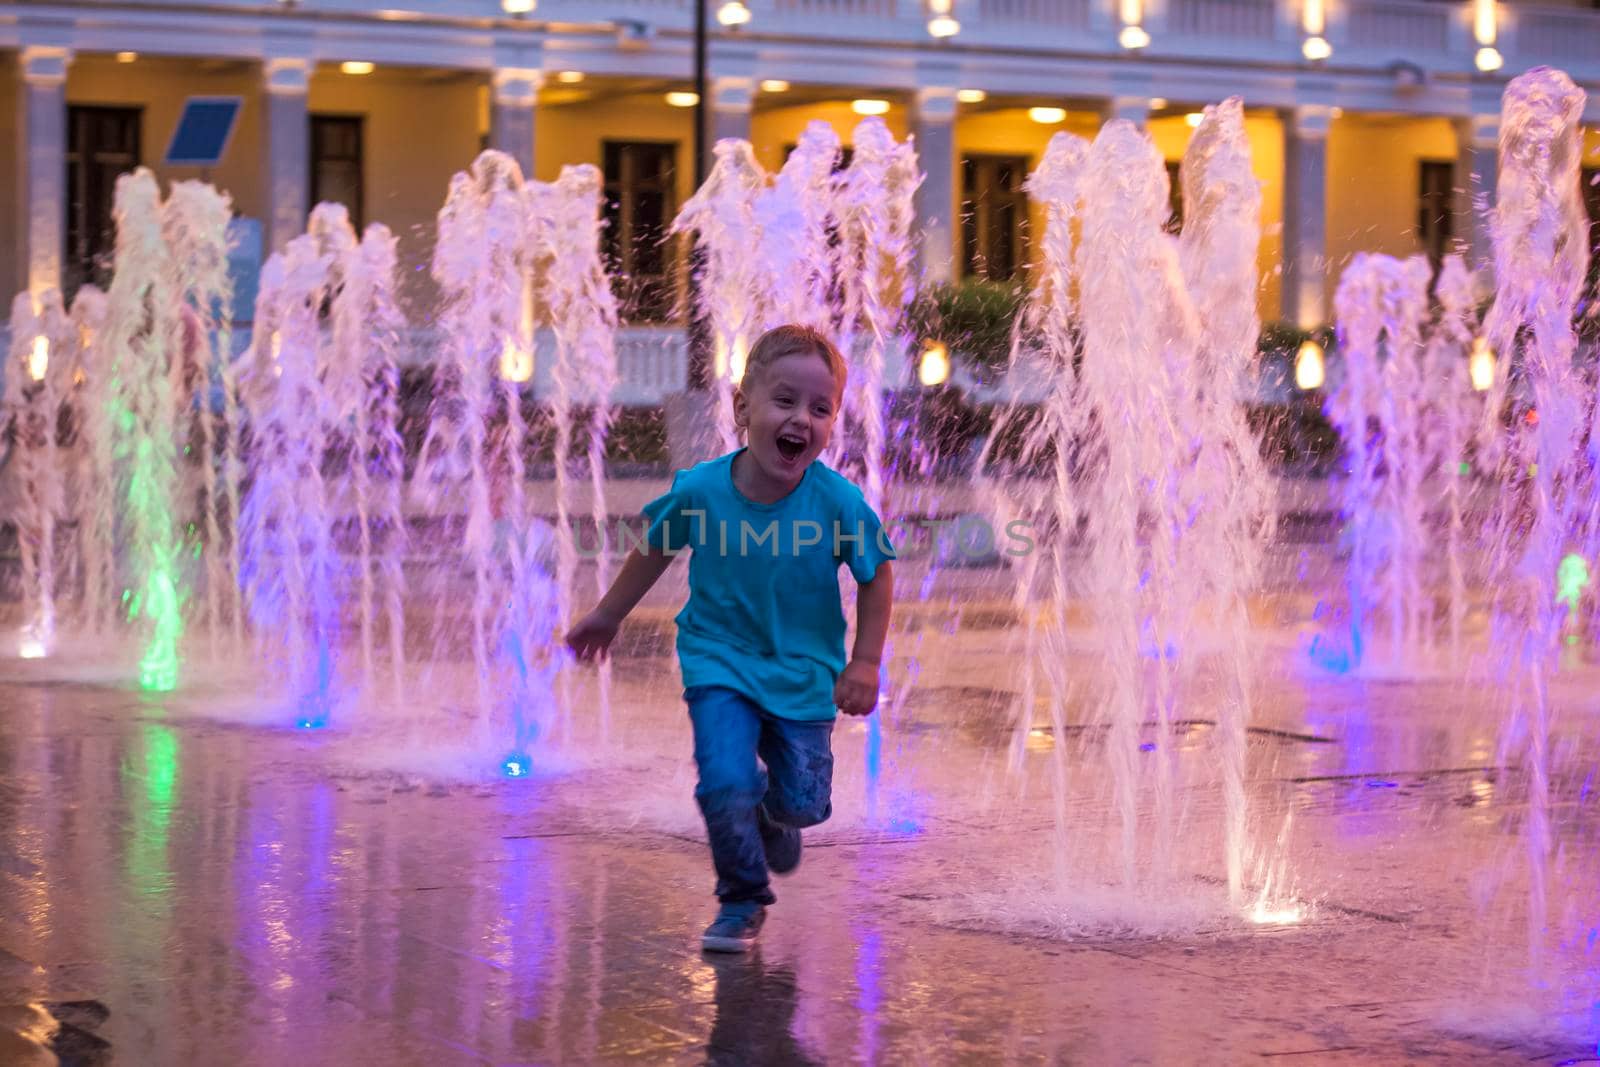 Children have fun frolicking in the fountains near the building in the park in the sunset light. Evening walk around the city